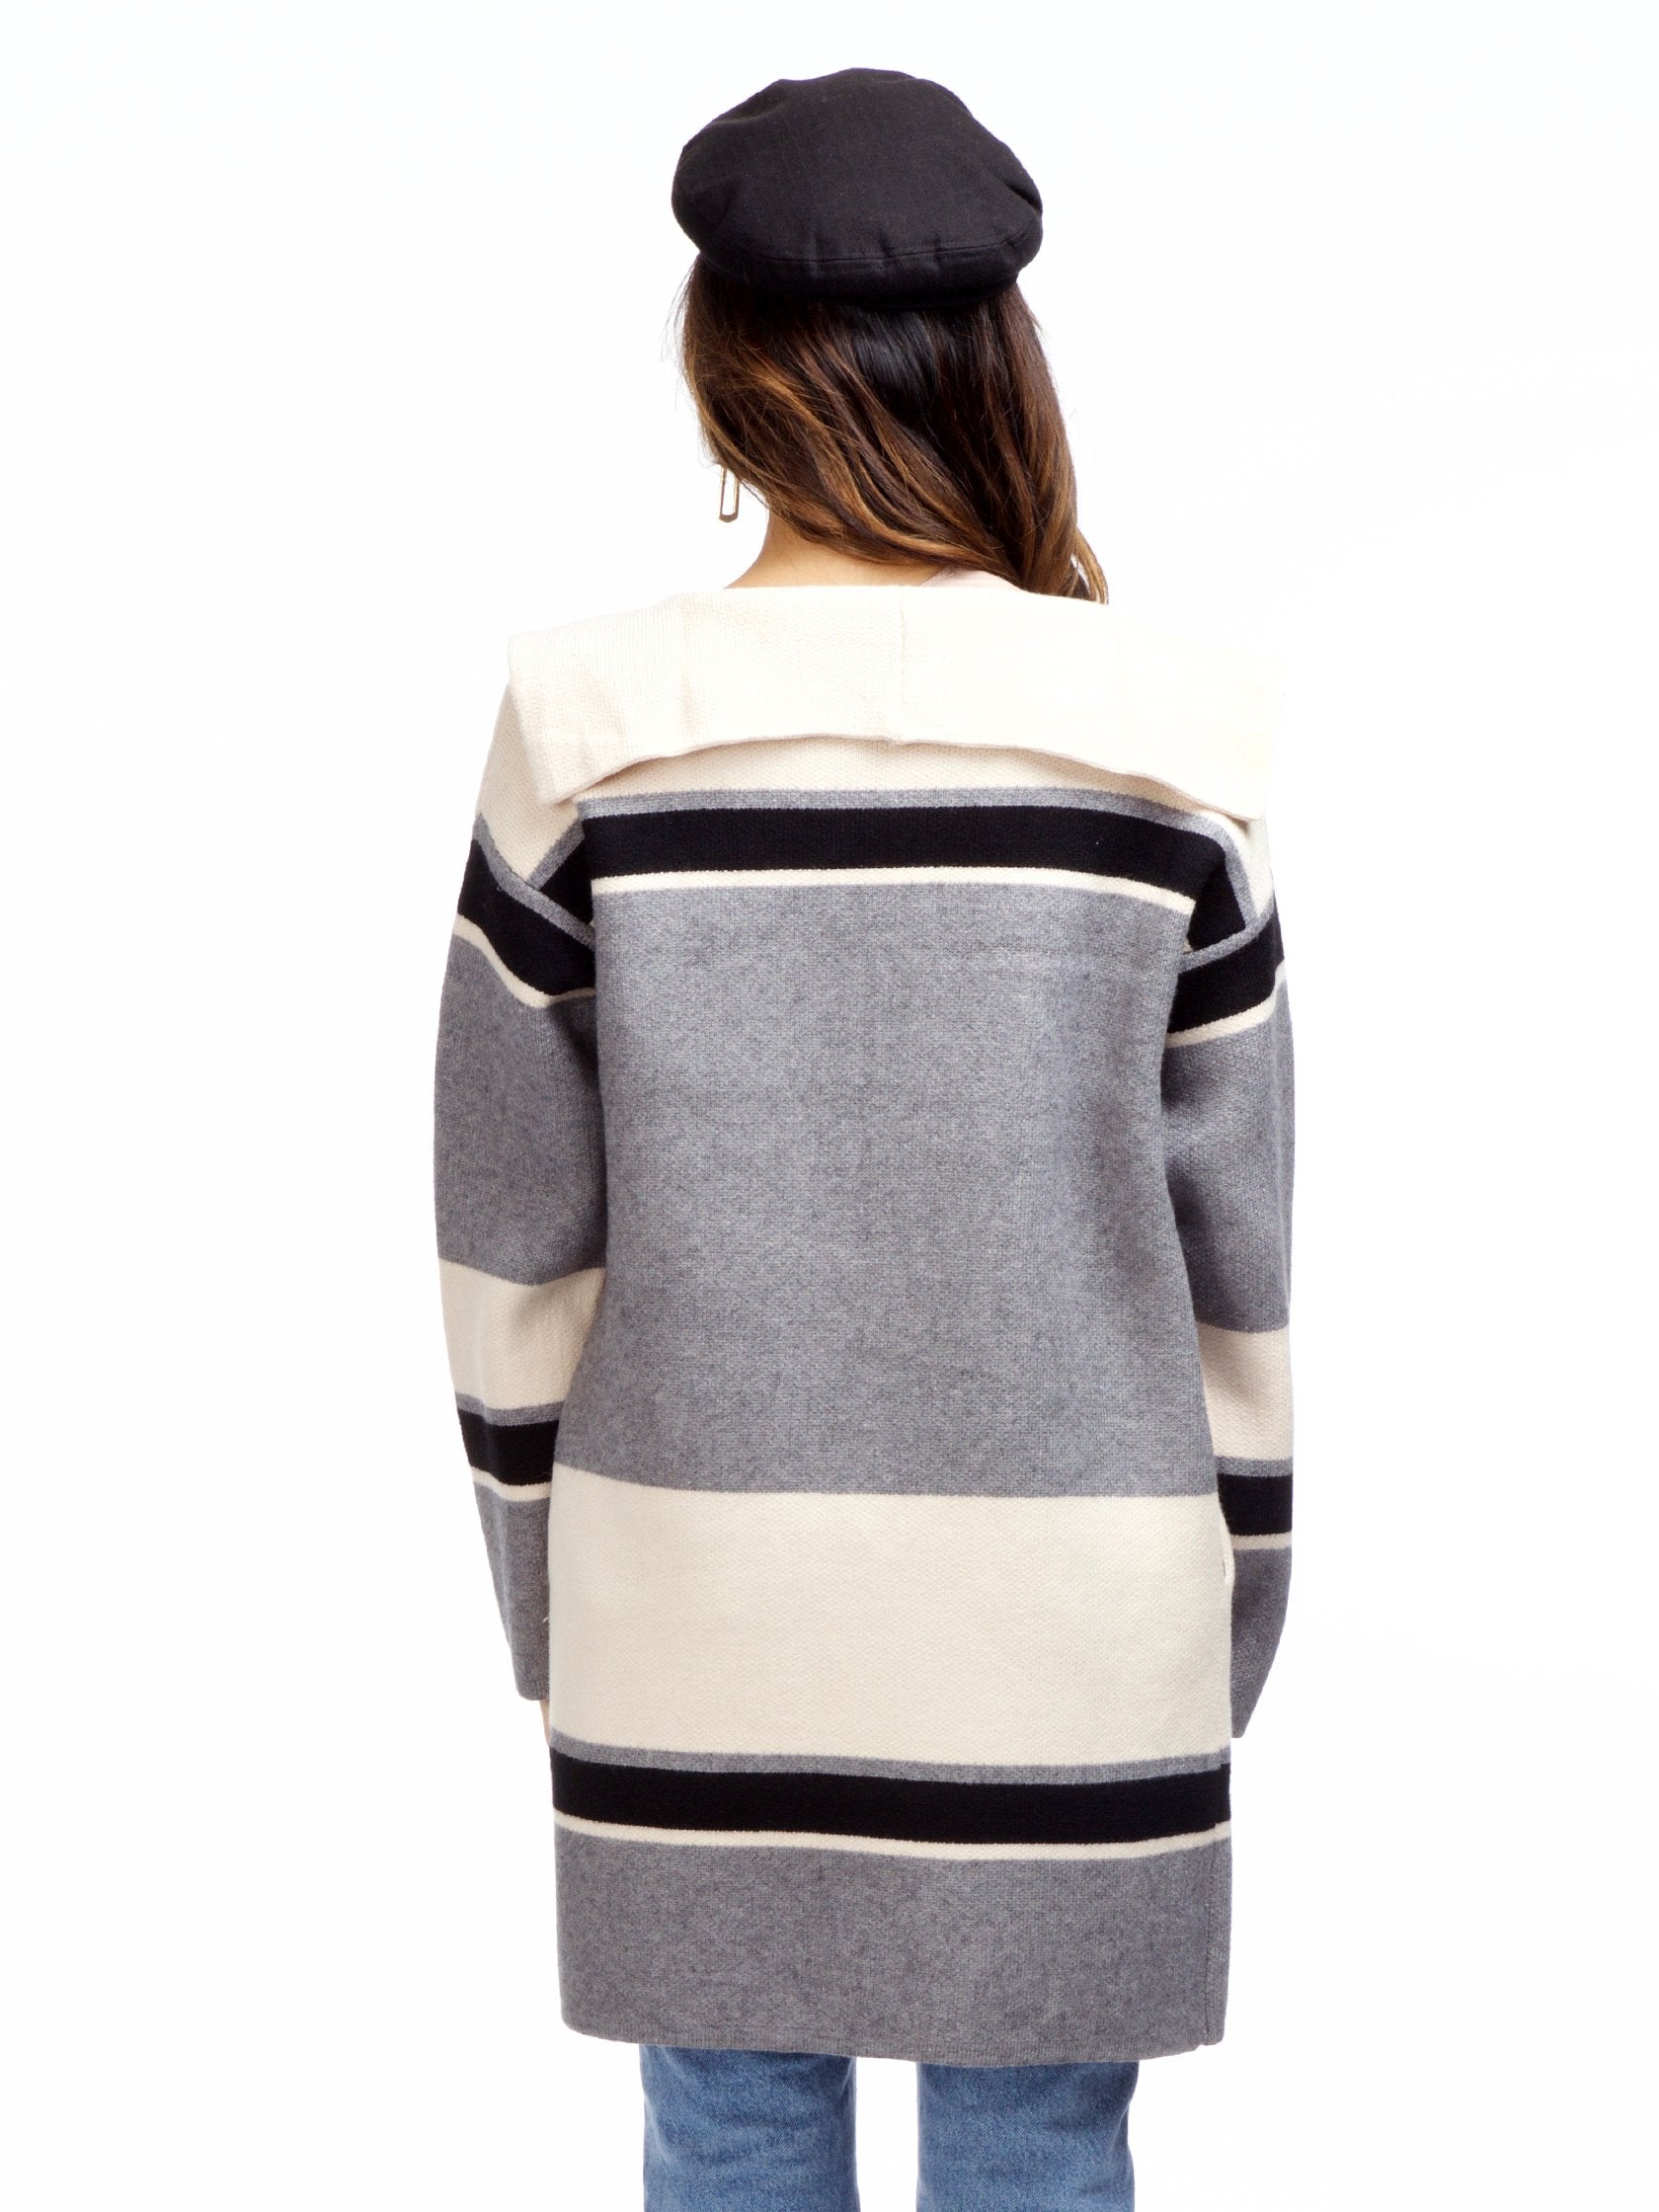 Women outfit in a cardigan rental from Strut & Bolt called Carmine Colorblock Knit Jacket